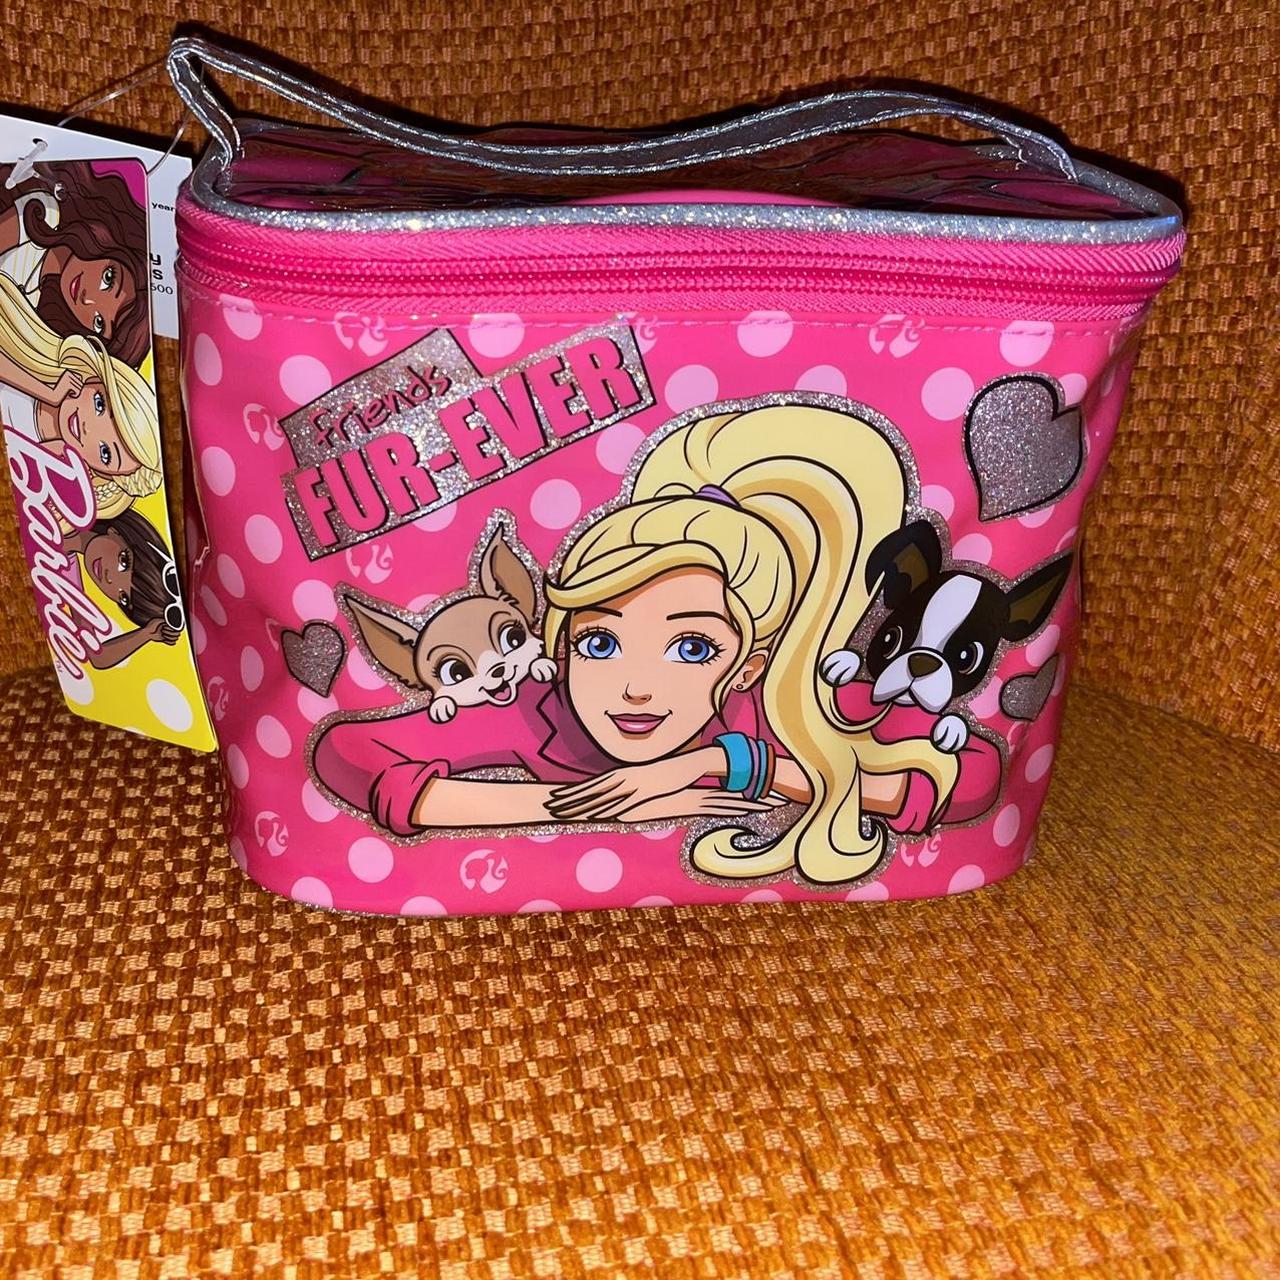 TOP5 FAV BARBIE MAKEUP BAGS YOU CAN'T MISS OUT!! - YouTube